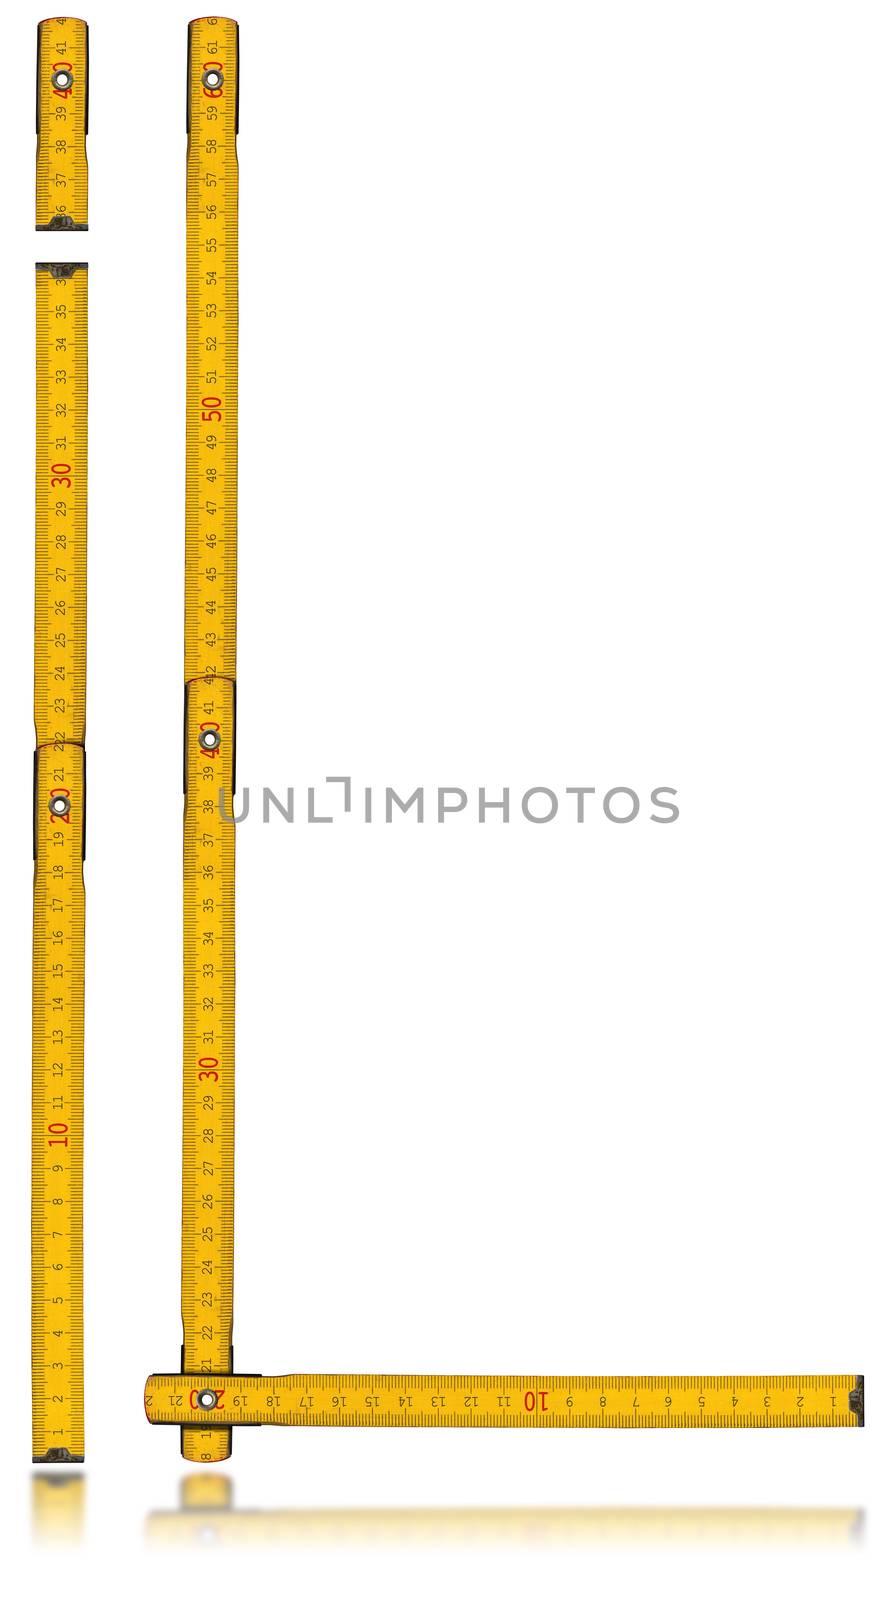 Font I and L - Old Yellow Meter Ruler by catalby